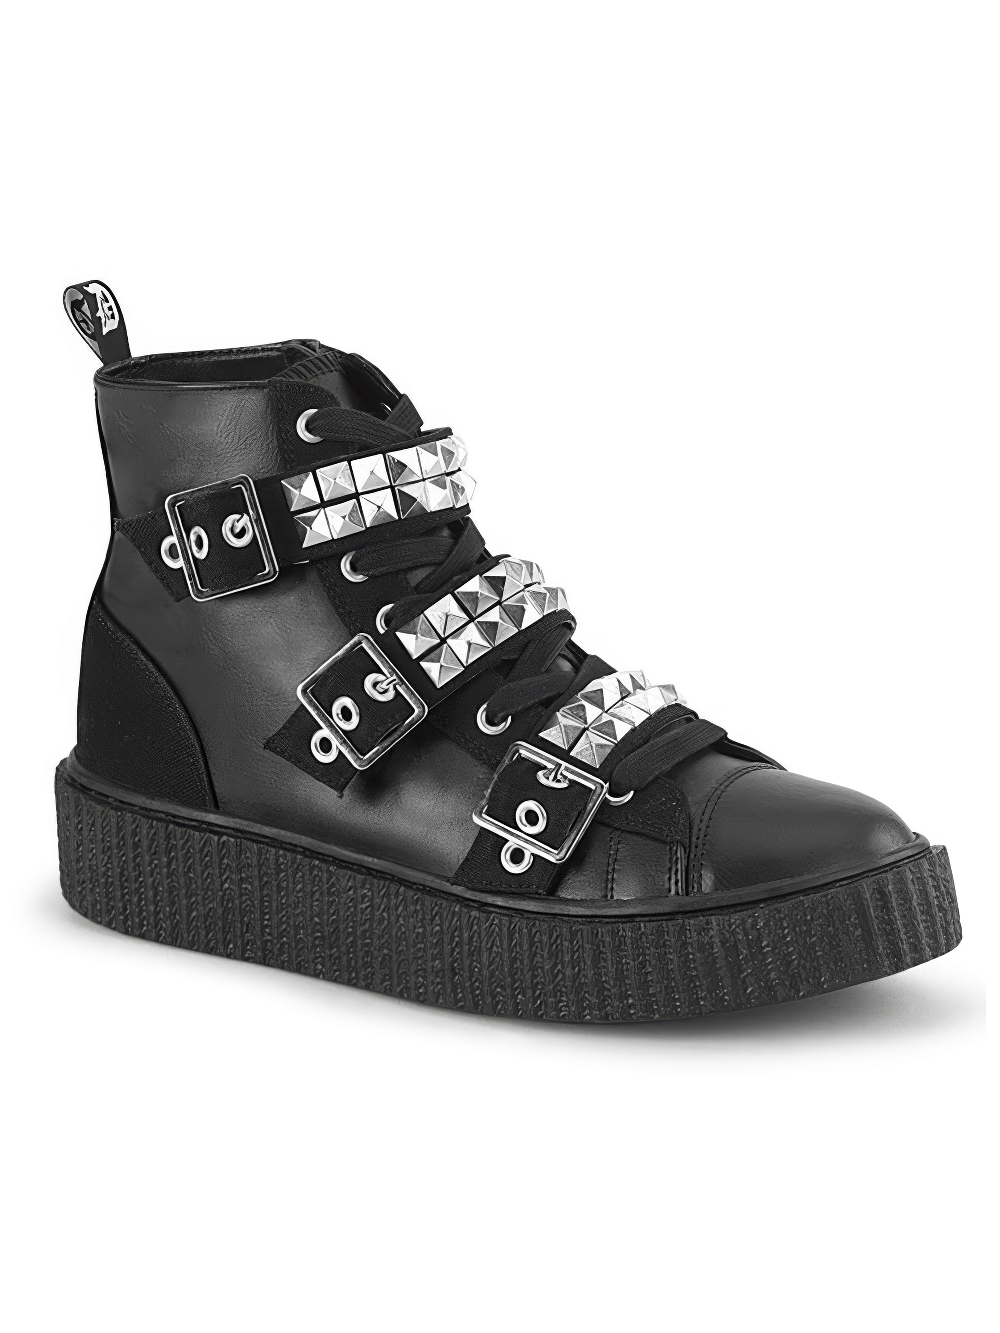 DEMONIA Studded High-Top Creeper Sneakers with Buckles